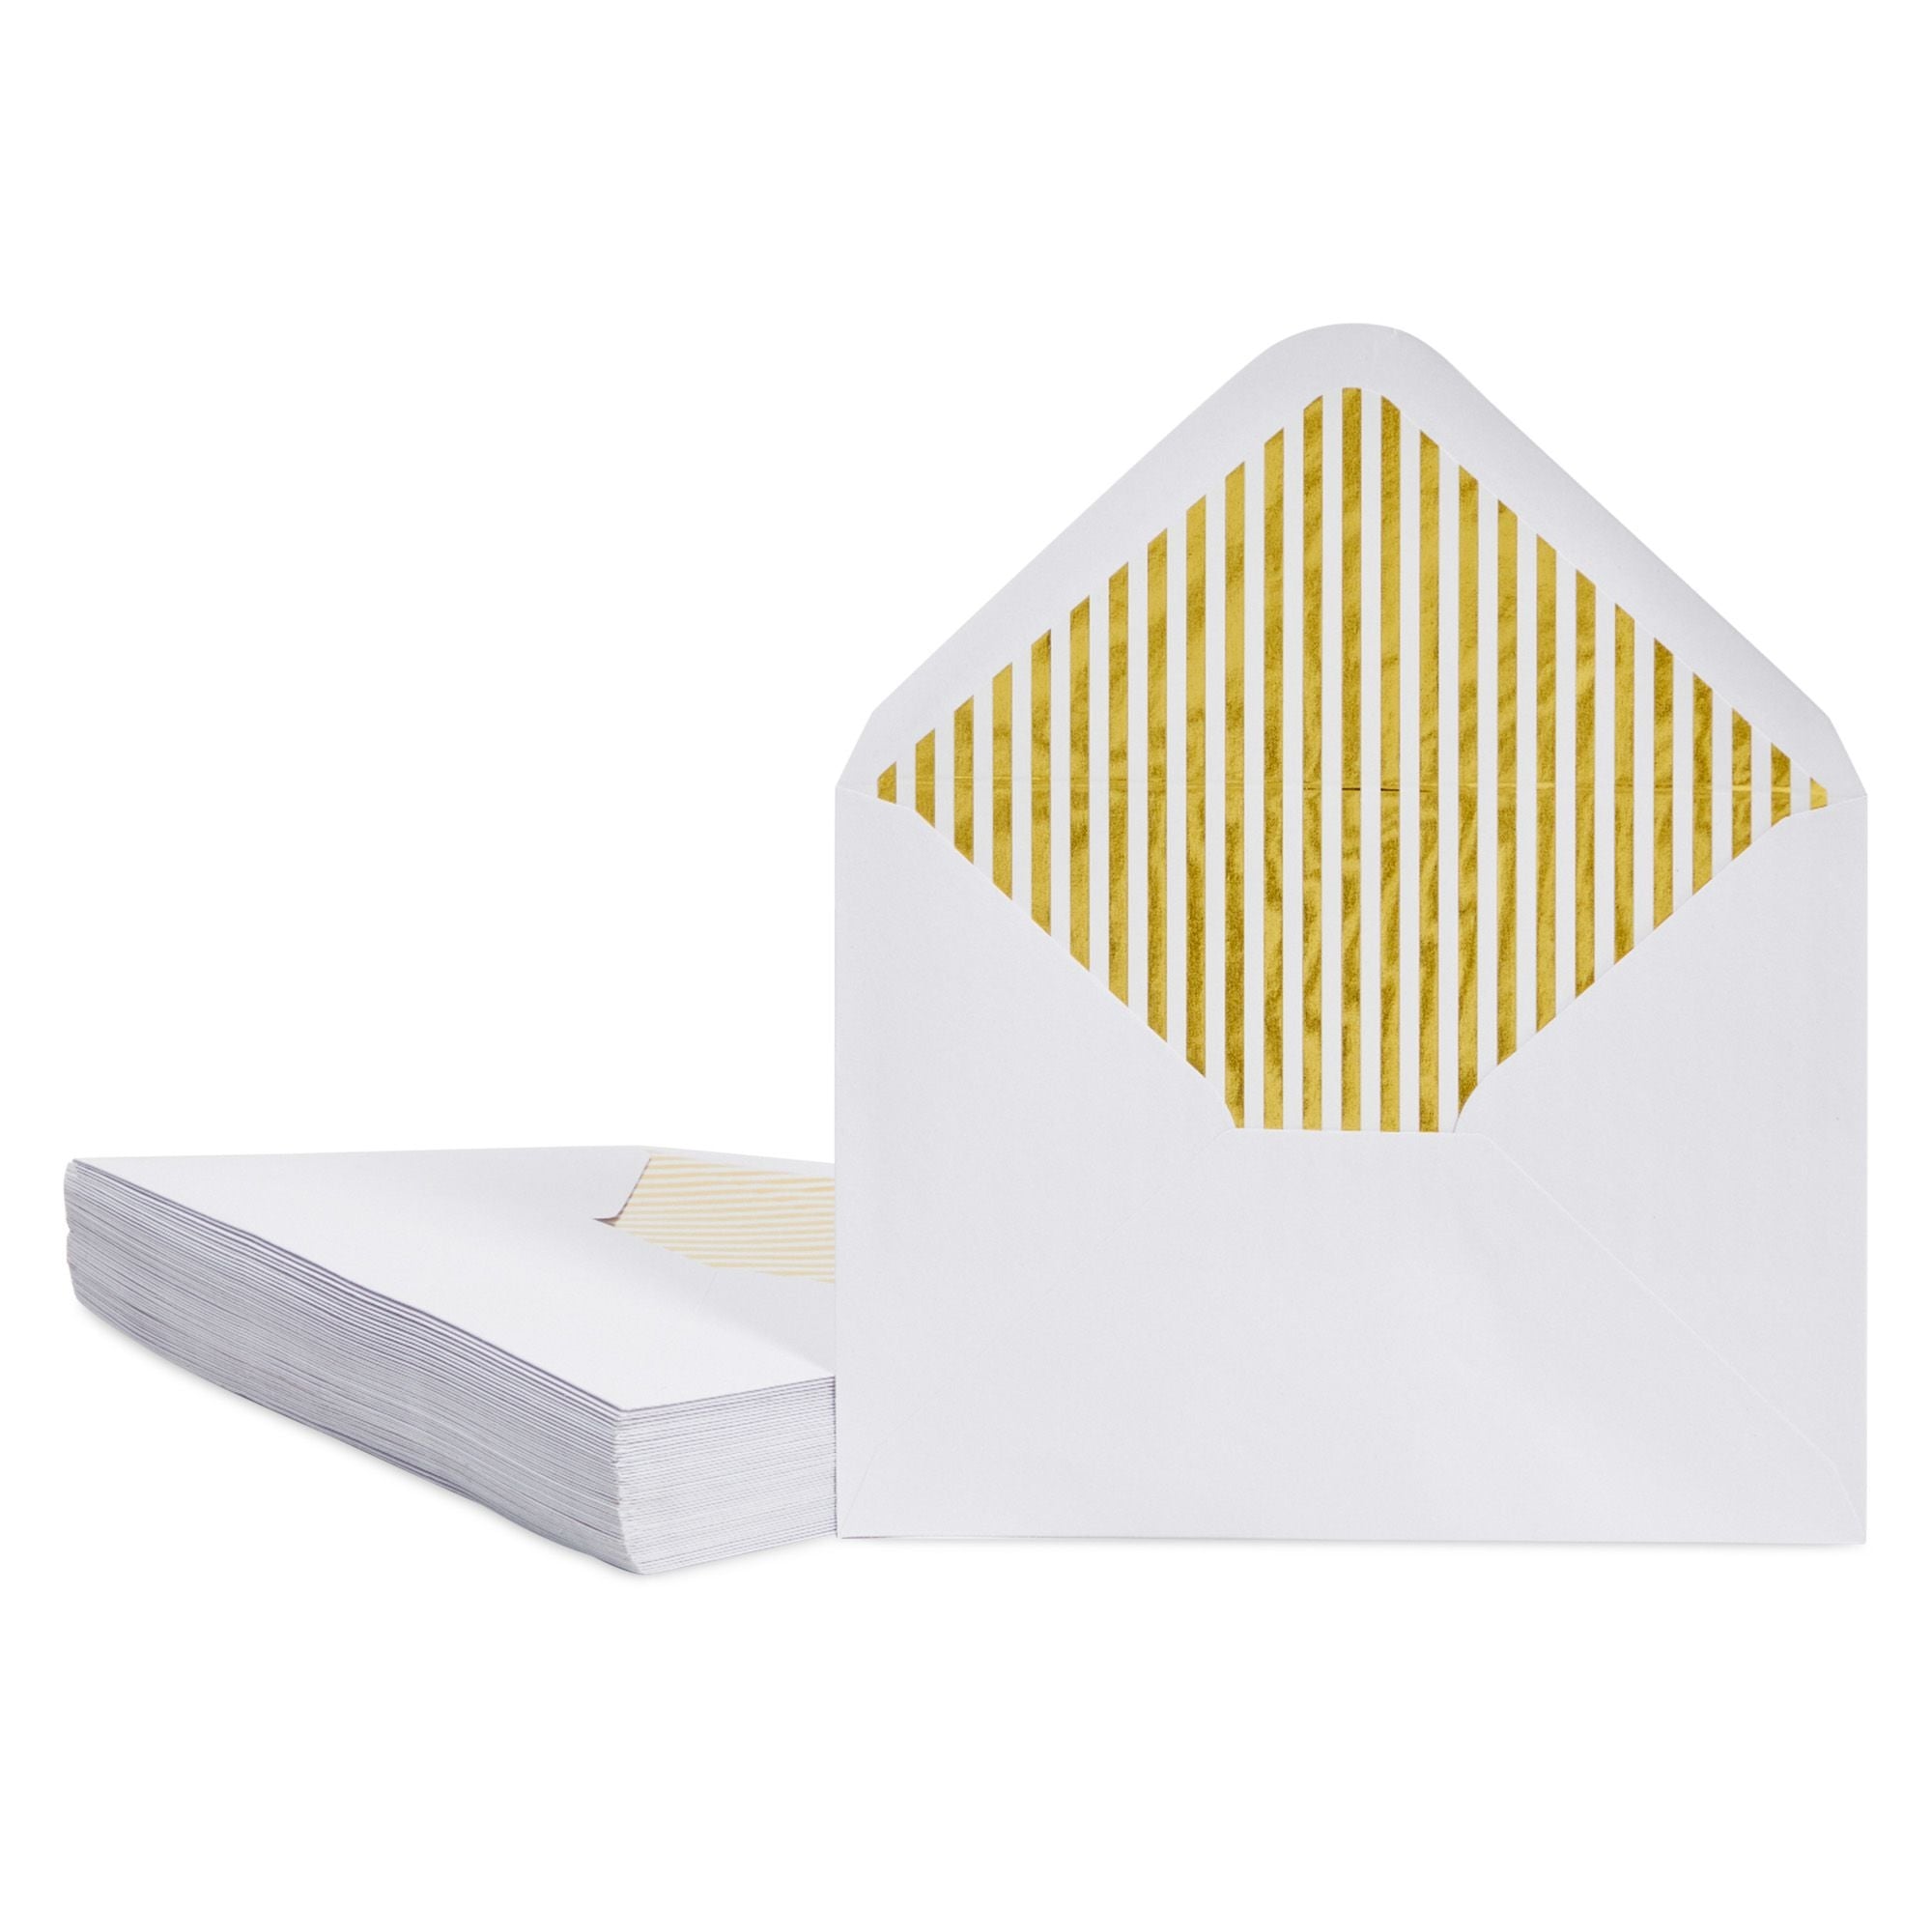 50 Pack White Envelopes, 5x7 Inch, A7 Size, Card and Invitation Envelopes